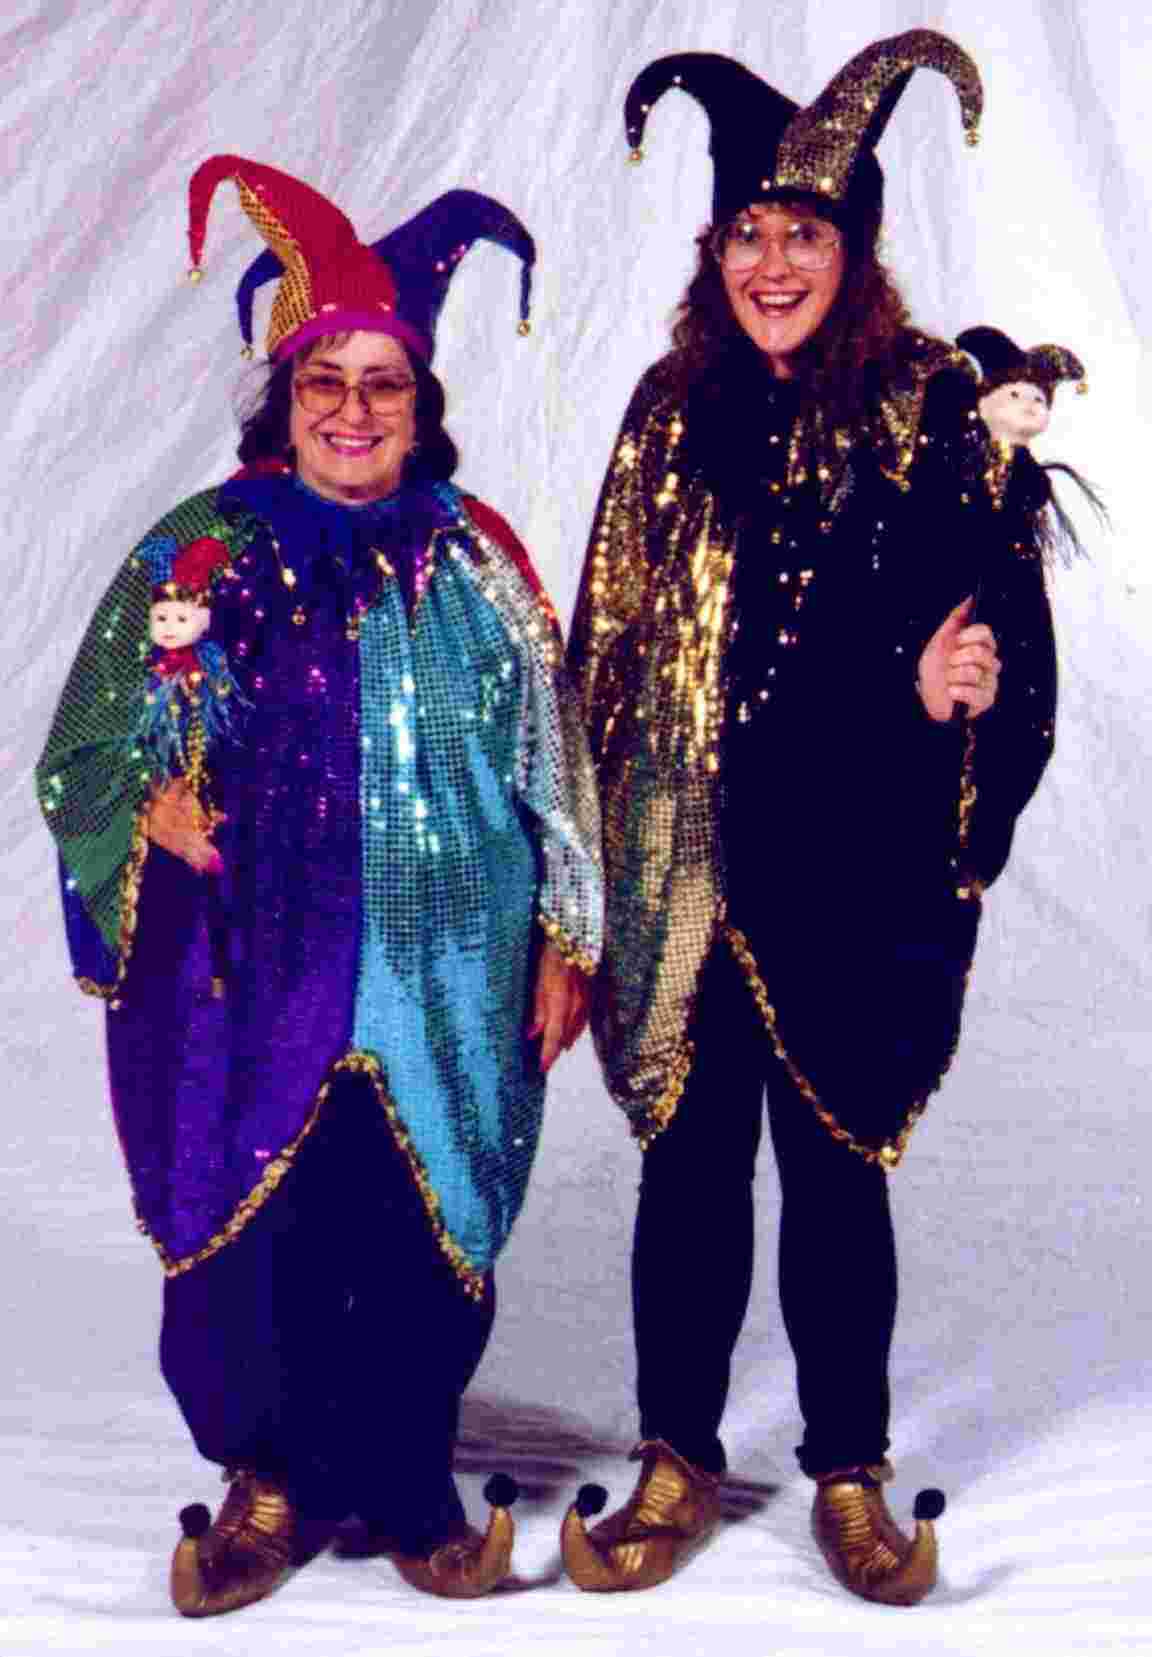 Costume World's owner Sue (right), and her mother, Marjorie, at the 1997 National Costumers Association Convention in Las Vegas.